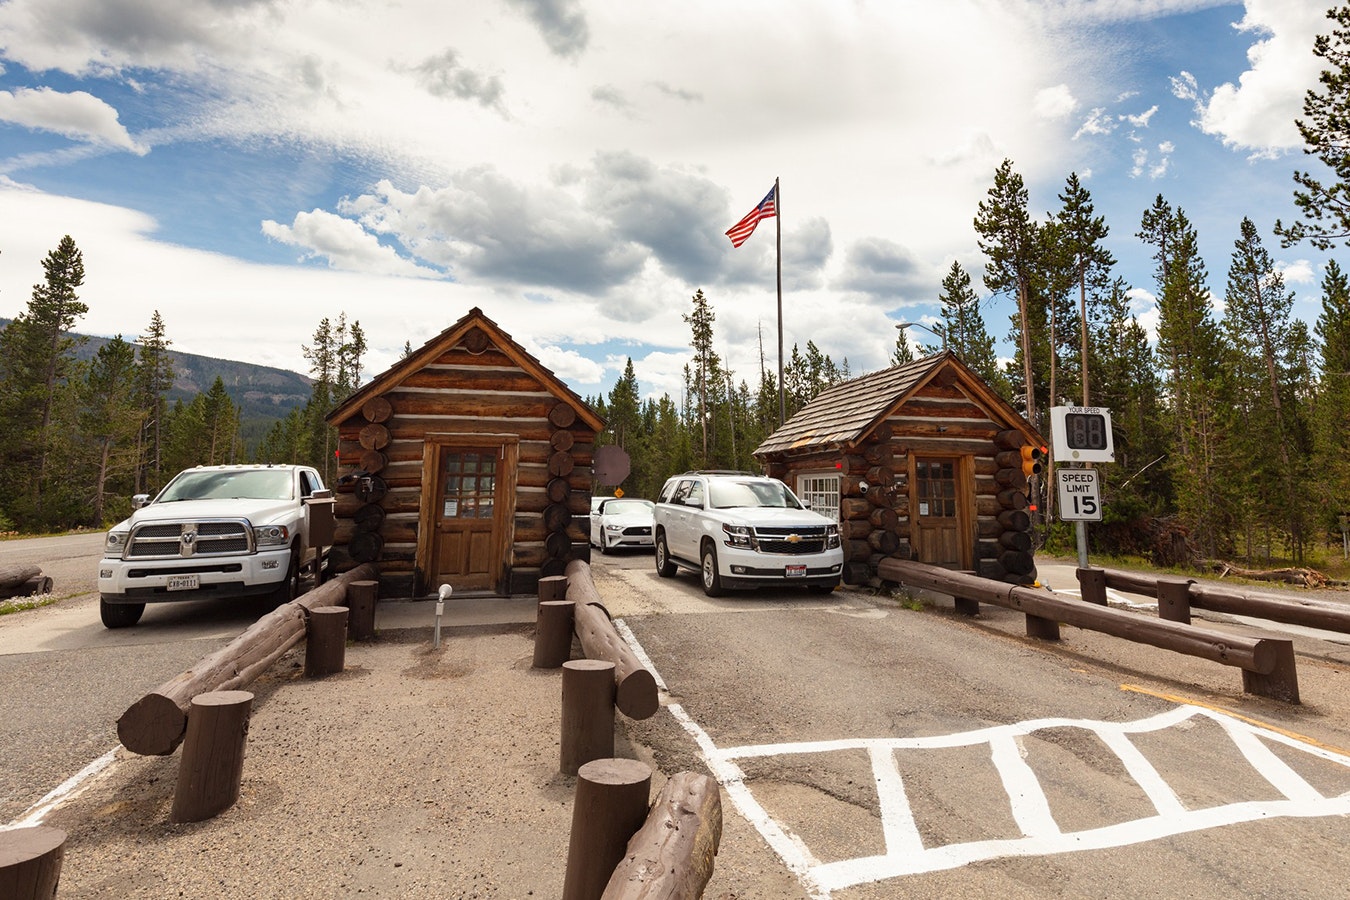 The National Park Service is trying a pilot program at several parks to not accept cash.